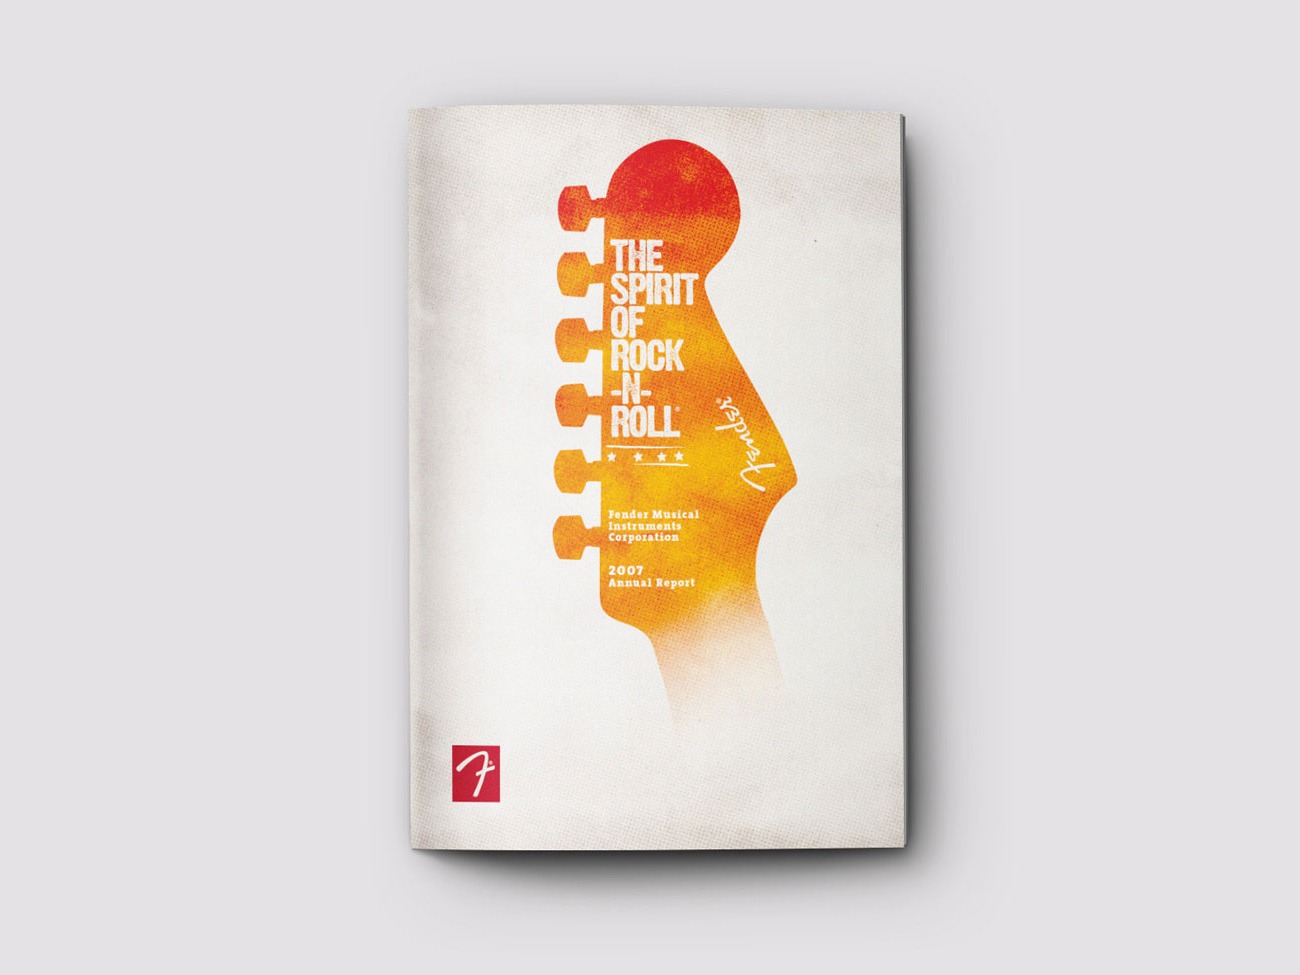 Fender Musical Instruments 2007 Annual Report